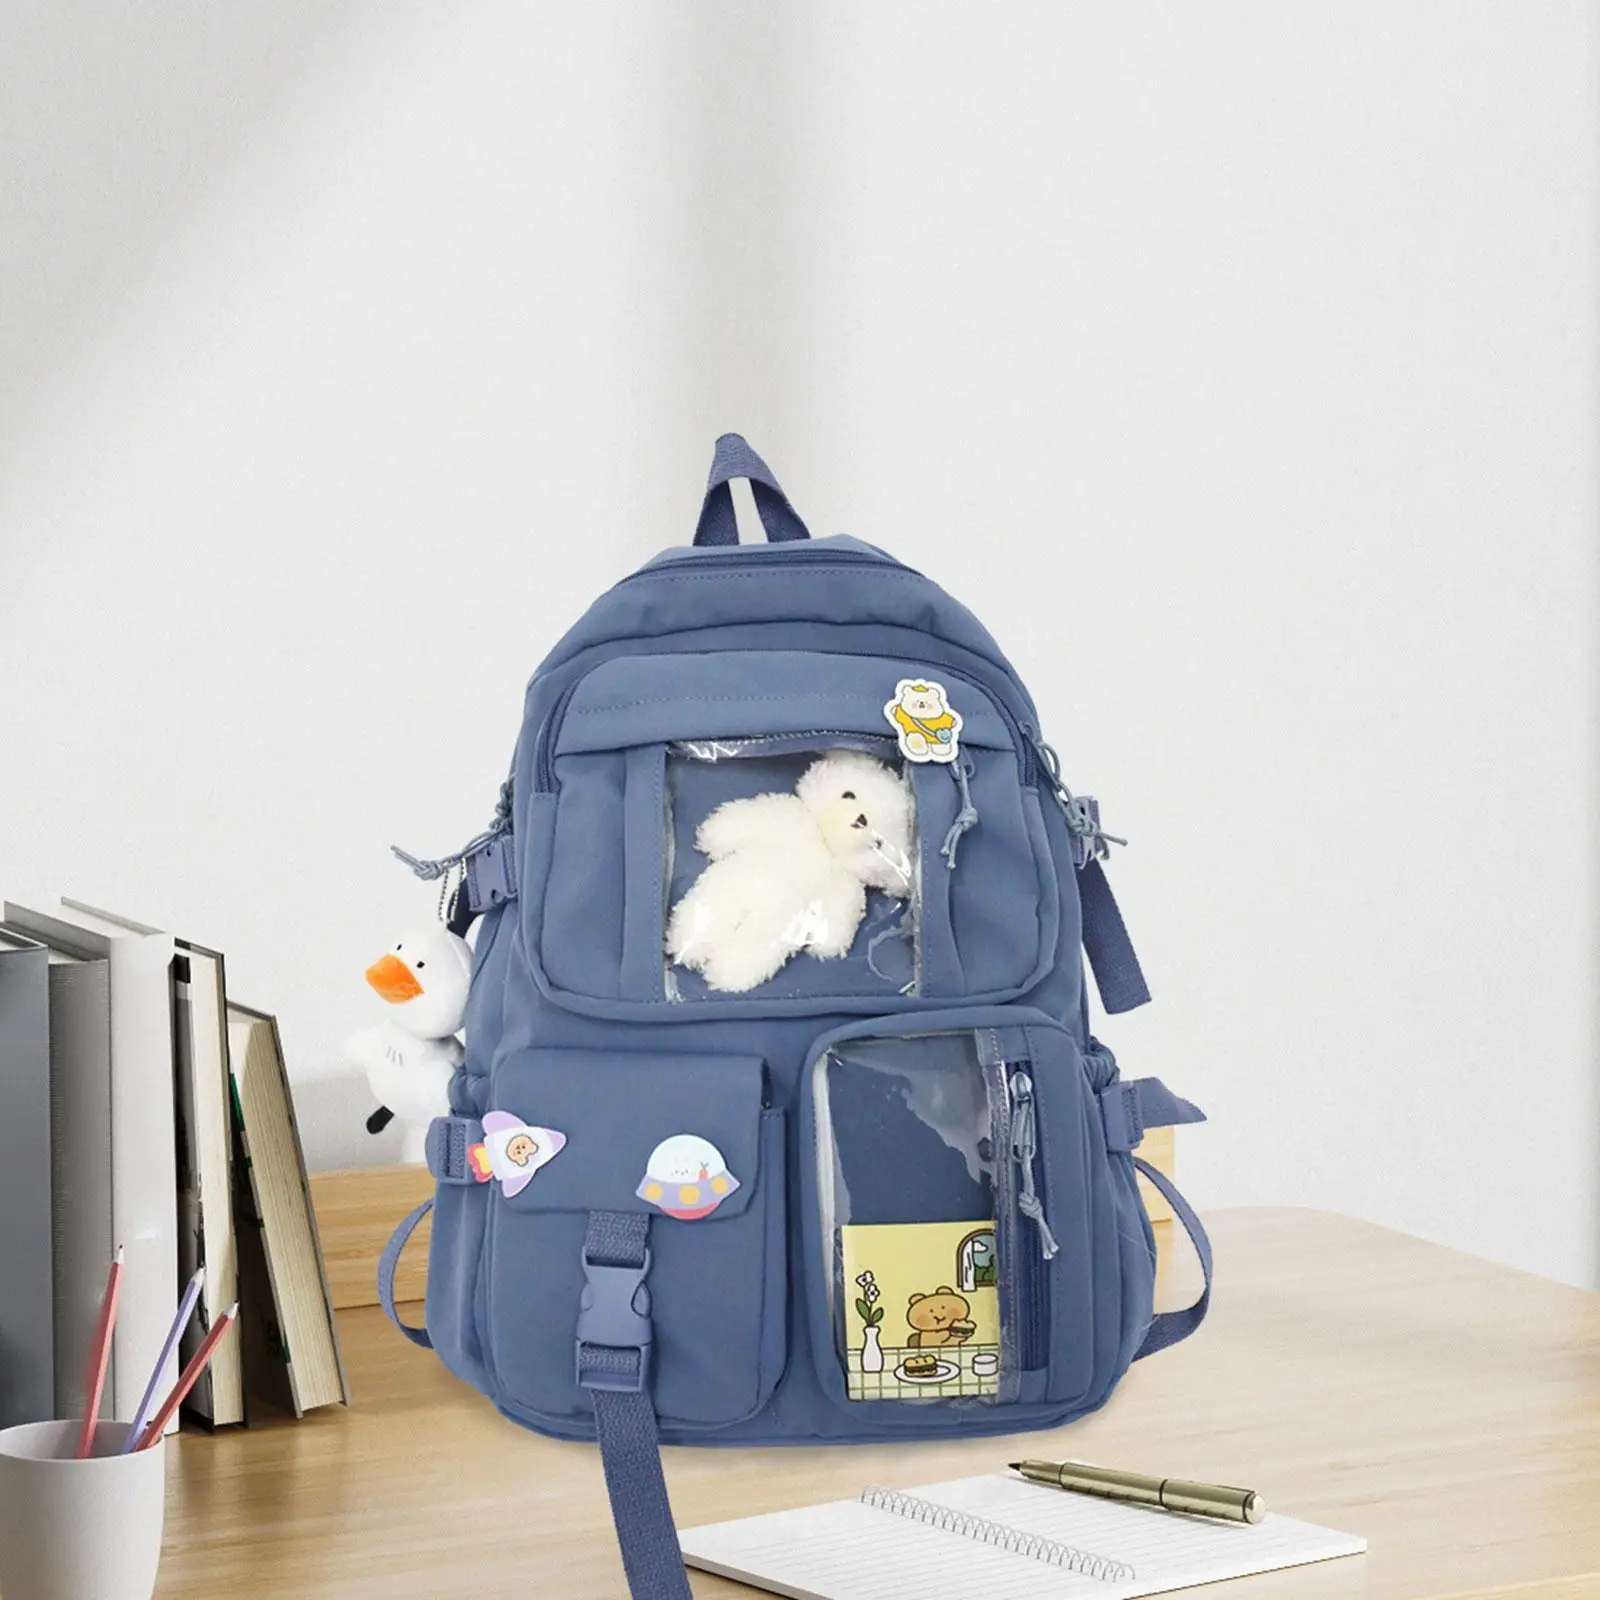 Women Backpack School Bag Daypack Large Casual Rucksack with Zipper Travel Bag for Girls College Female Teens Students Gift